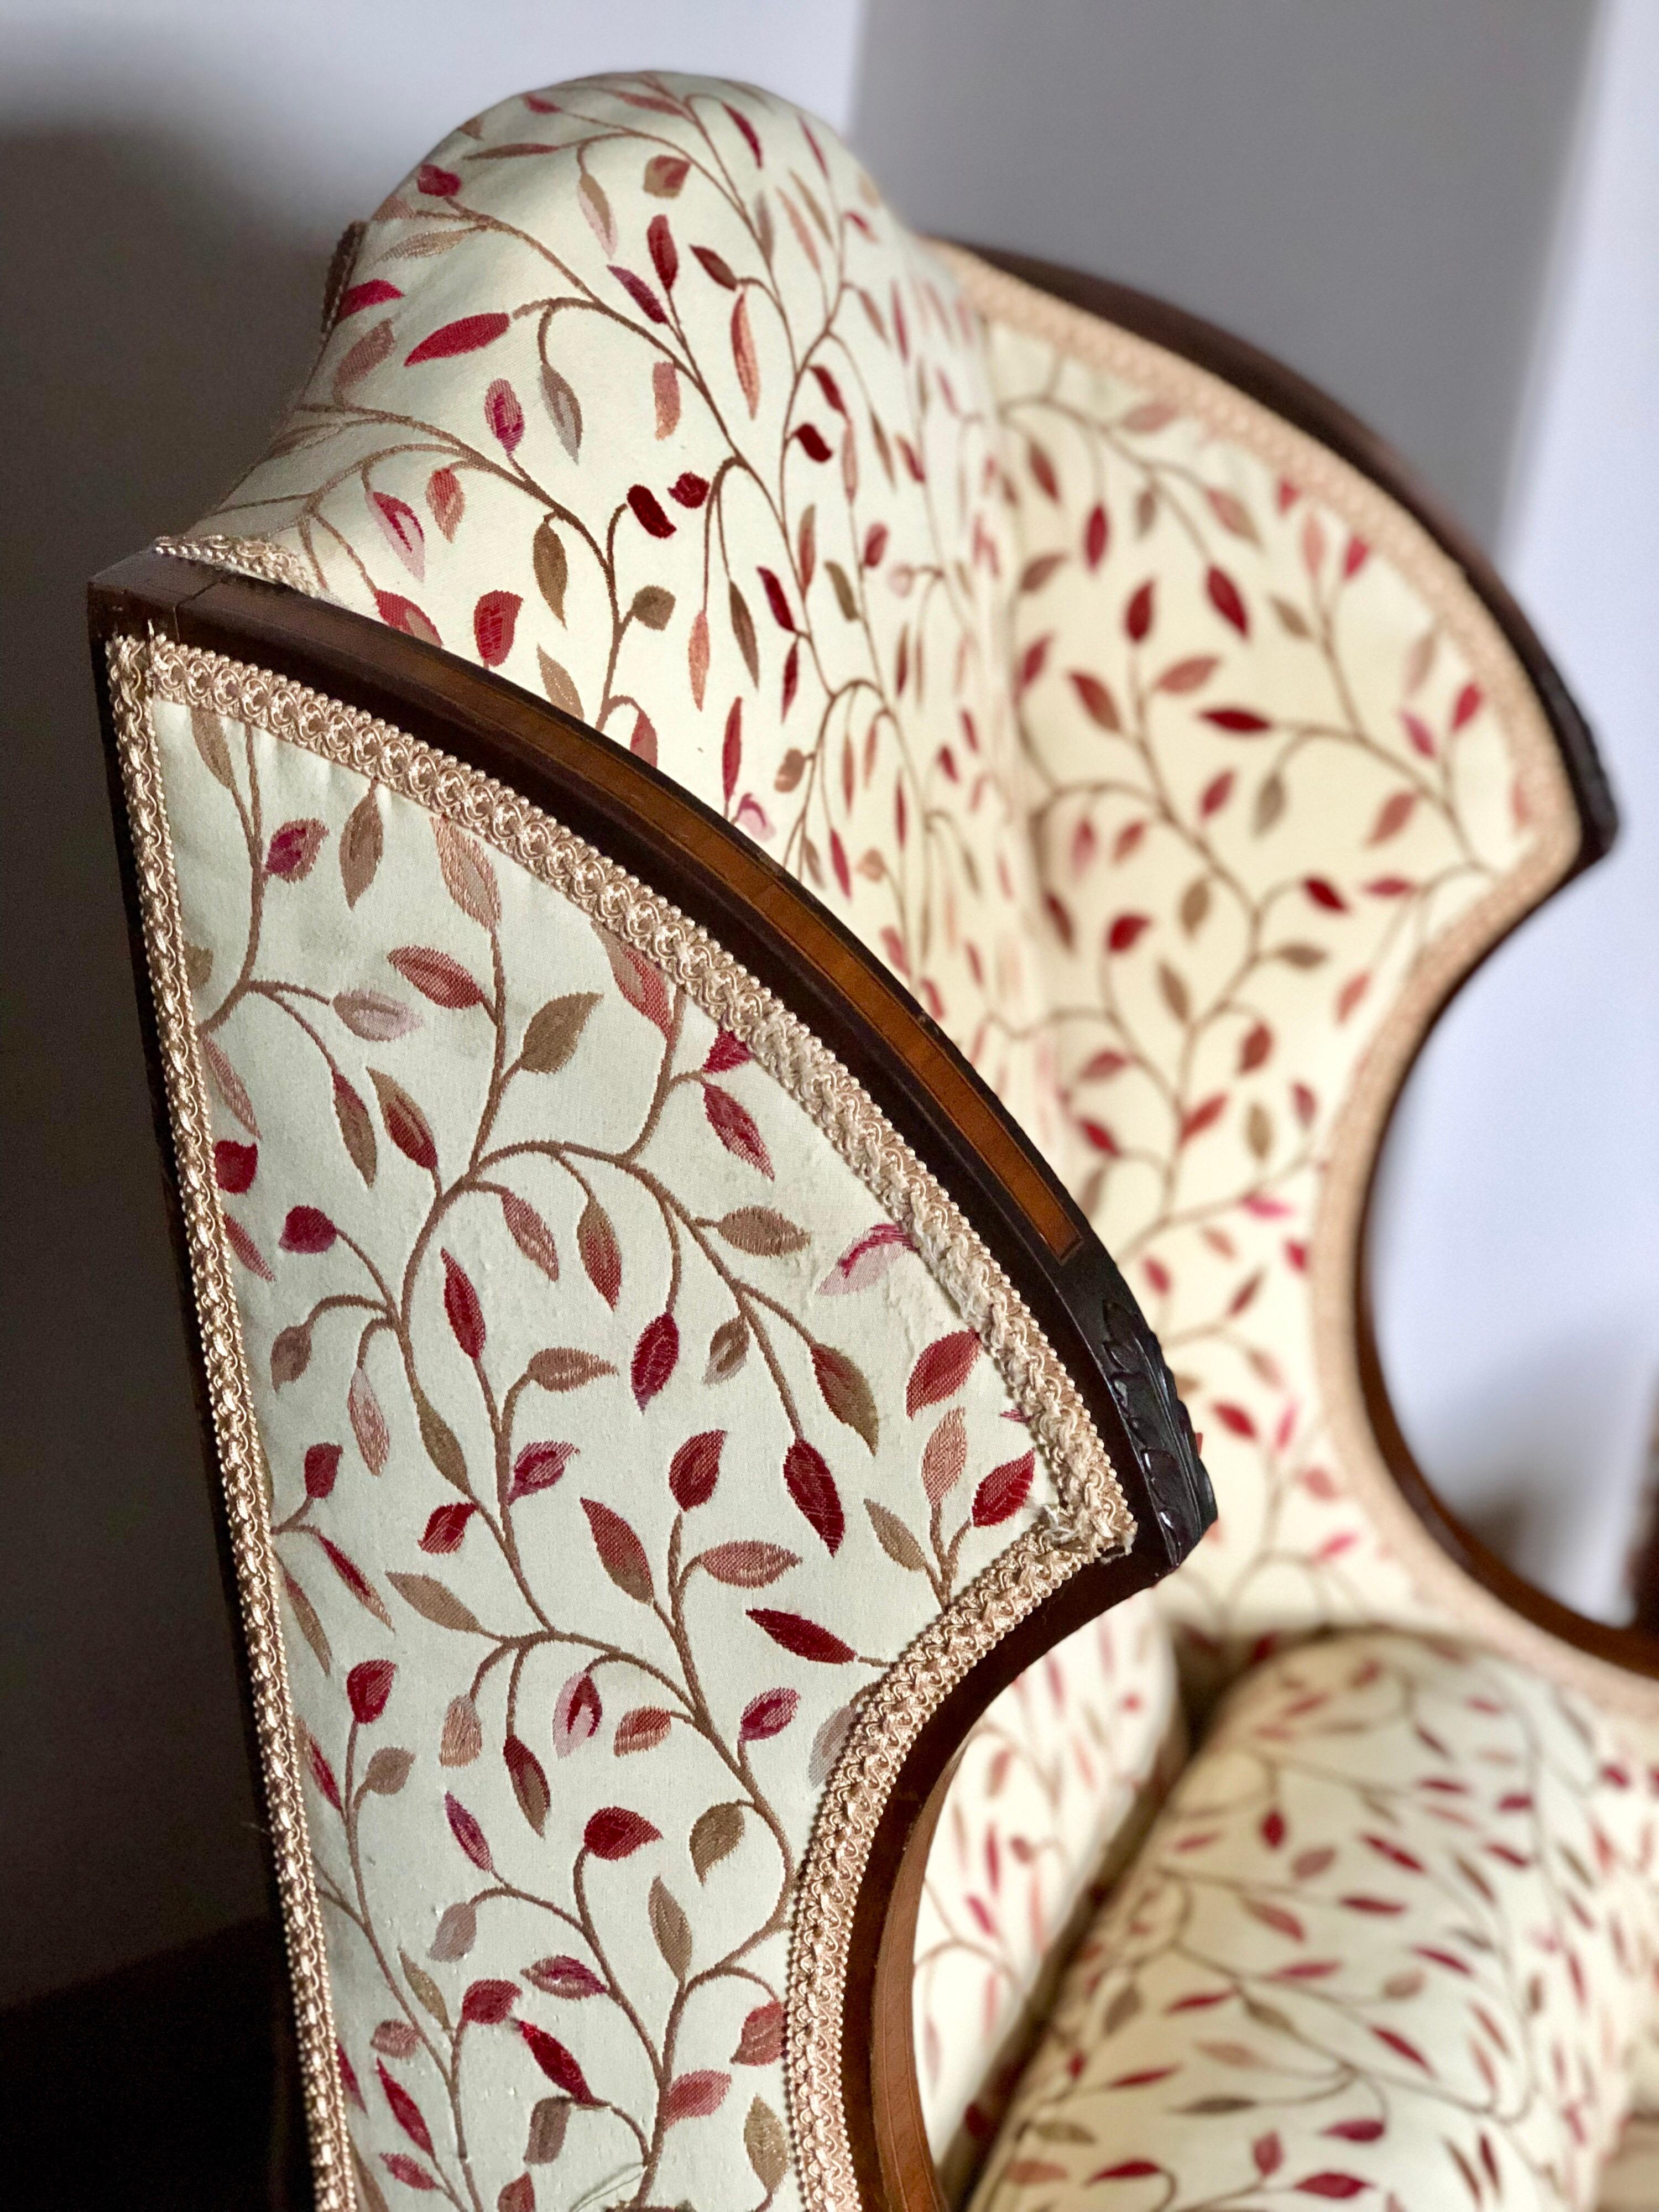 Late 19th century Victorian mahogany wing armchair, inlaid with satinwood banding, the frame carved with leaves, on square tapering legs and ceramic castors.
Private collection of Sir J. Lever
England, circa 1880.